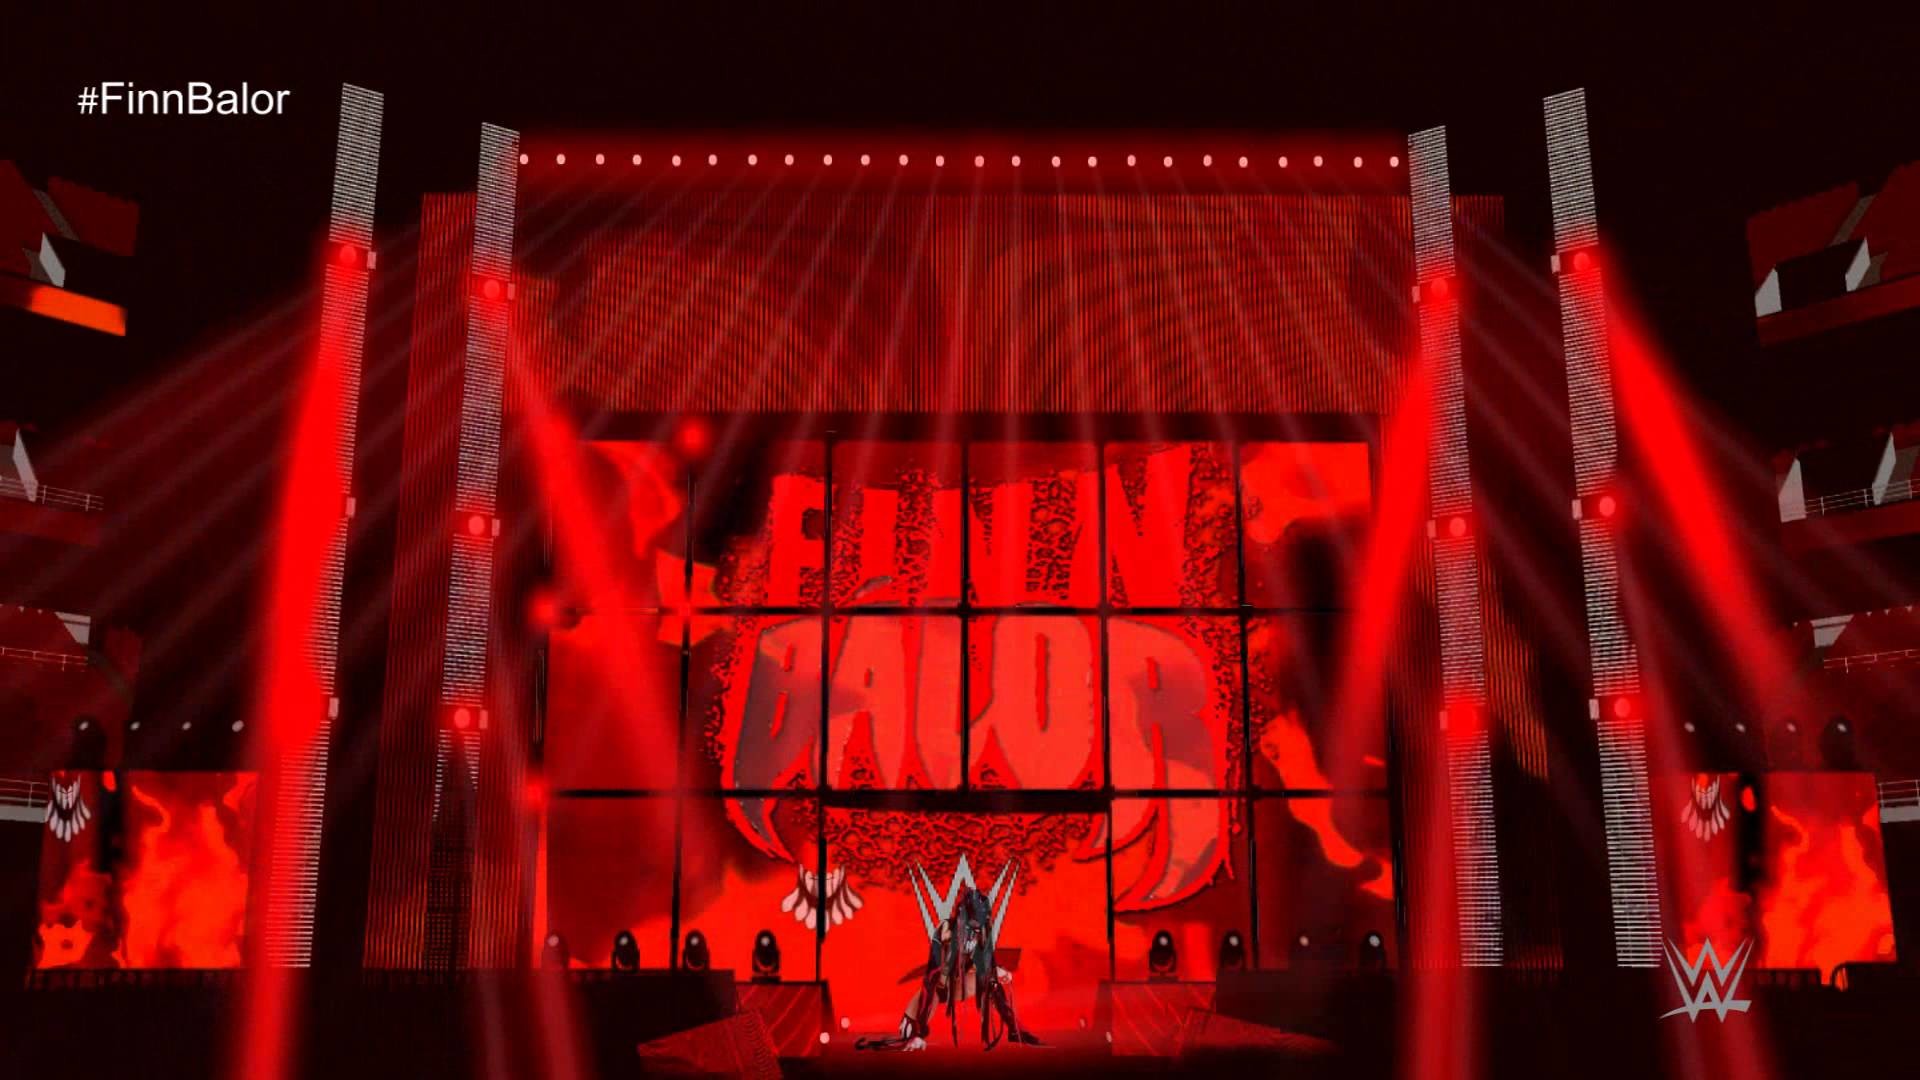 1920x1080 Download Finn Balor wallpapers to your cell phone - balor club .